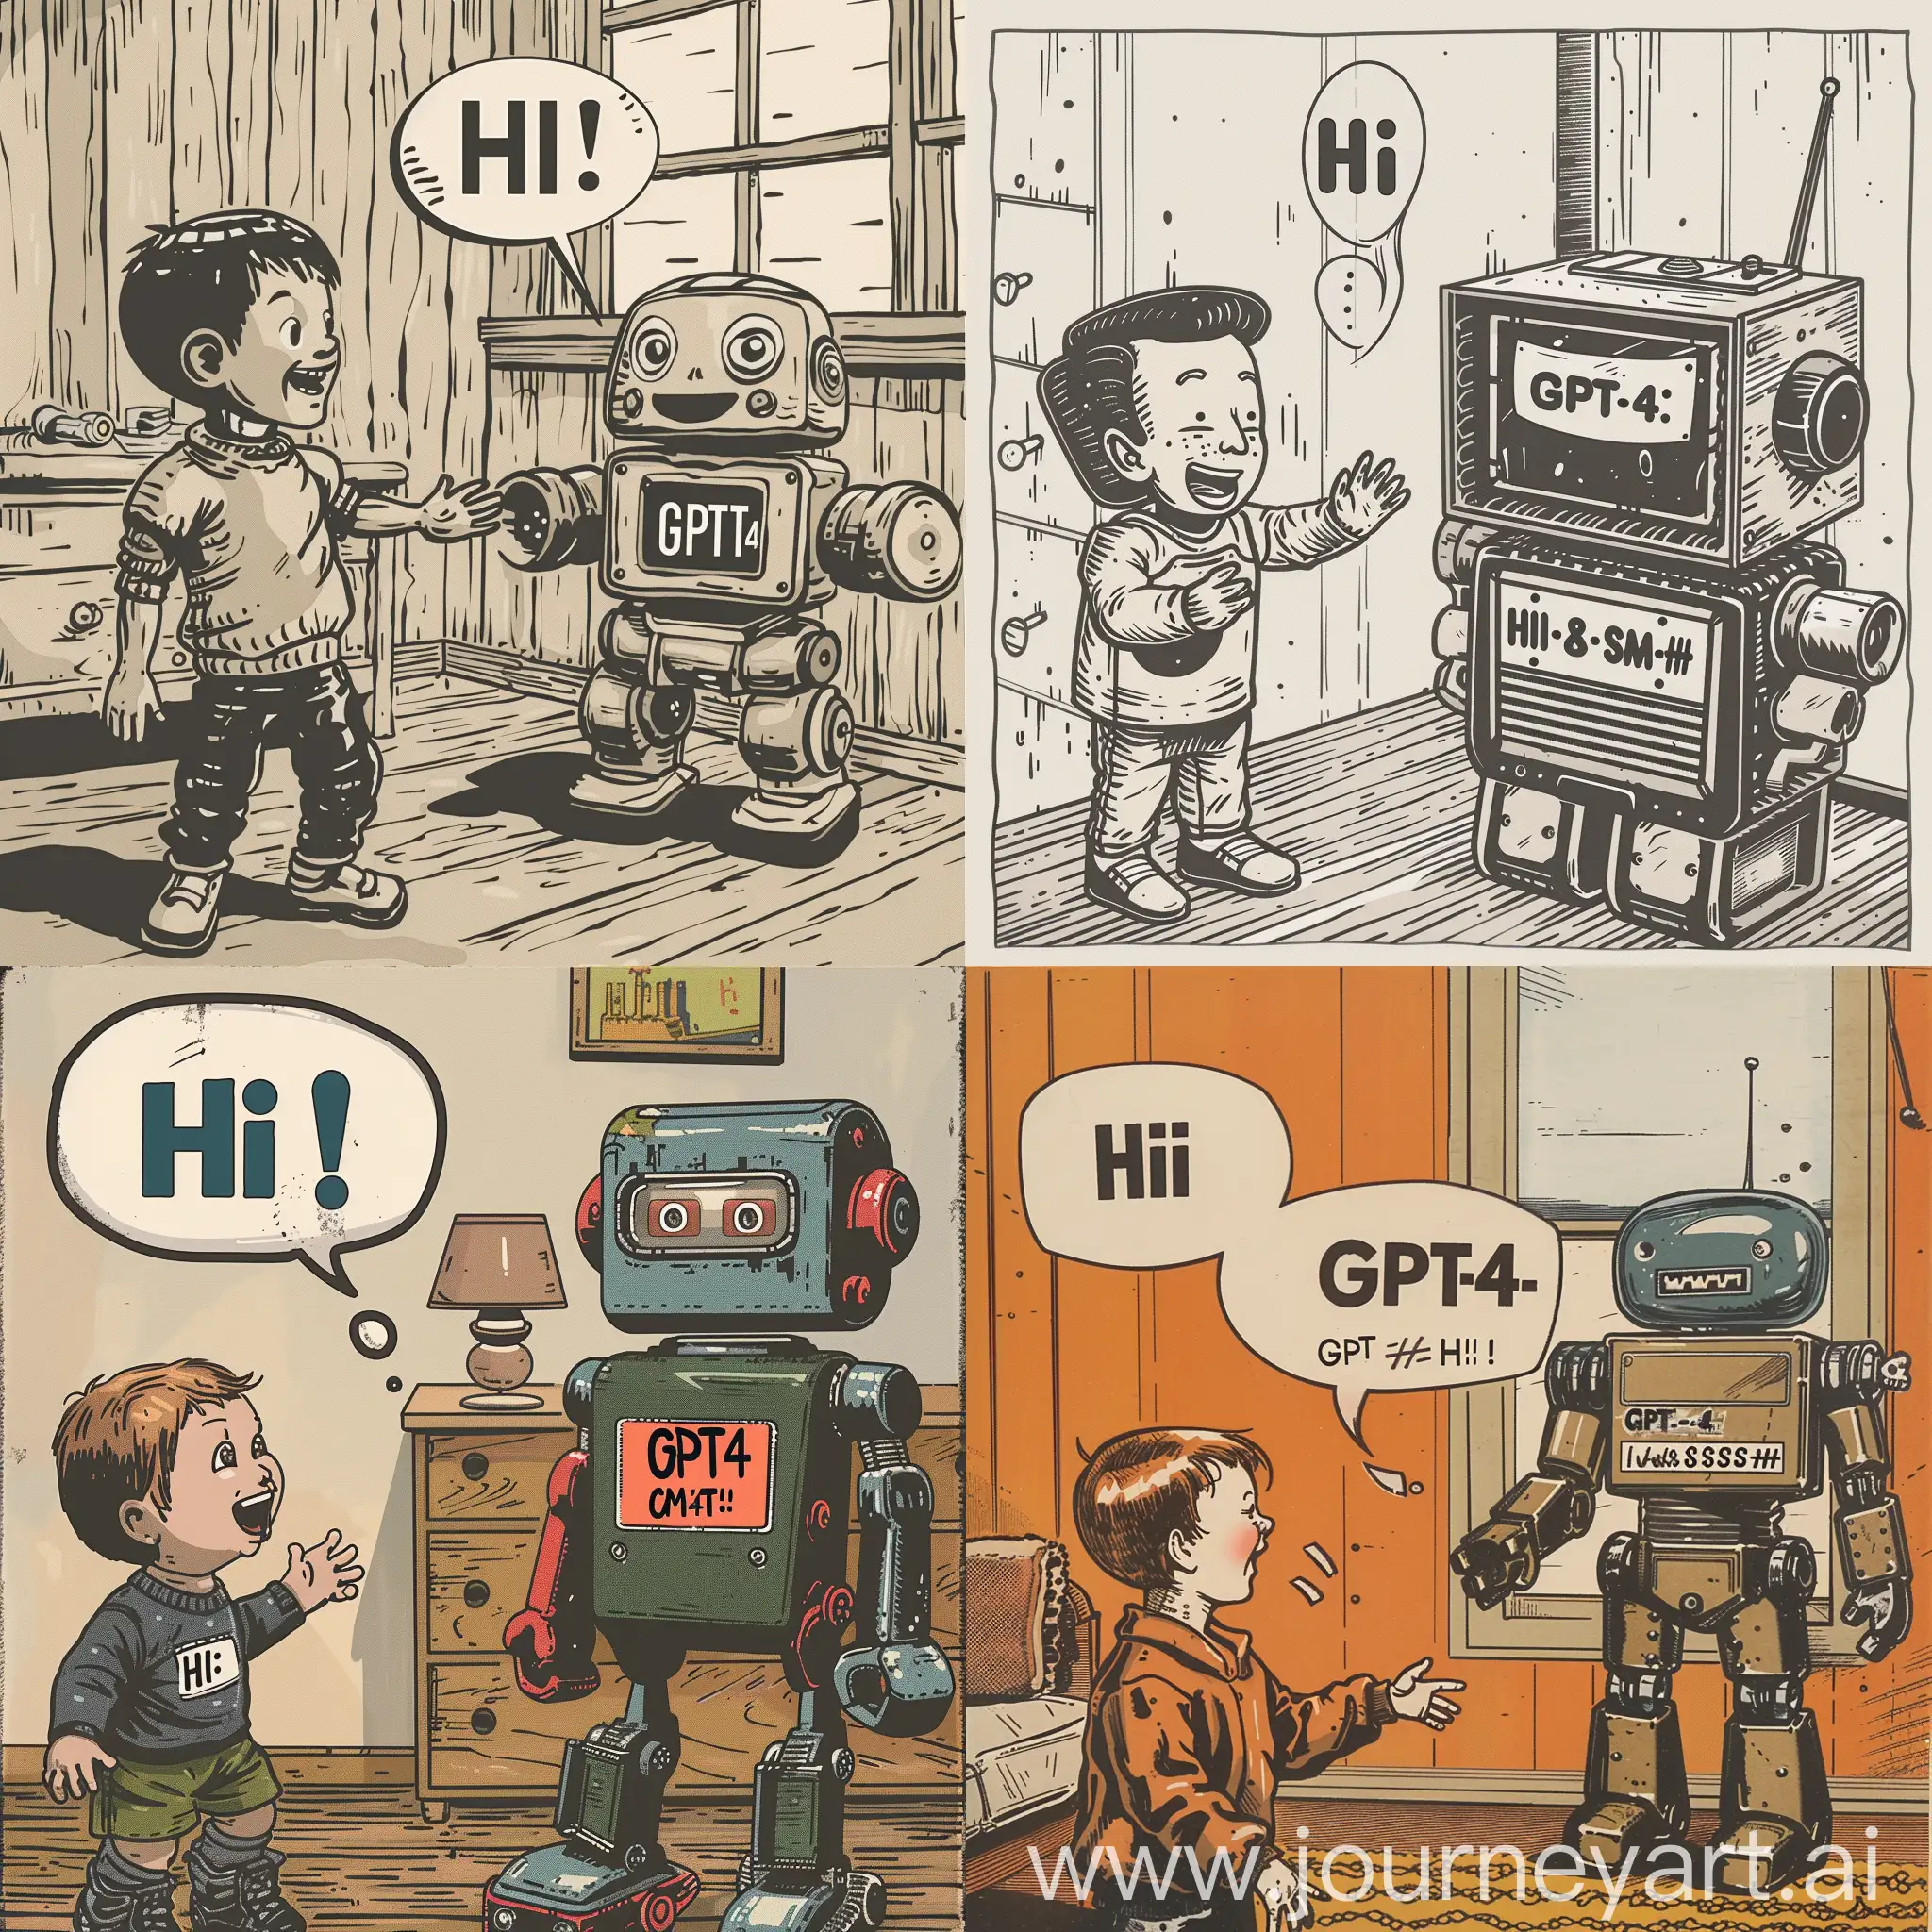 A child excitedly interacts with a toy robot in an American middle-class child's room, styled as a simple yet cozy setting.

Toy has a label with "GPT-4", showed the model of this toy.

Child greet to toy, cartoon bubble with "HI !" and toy reply to child, cartoon bubble with "HI, %&S*#@". 

The scene captures a moment of budding friendship in a newspaper cartoon style, featuring bold lines, simple shading, and expressive characters, reminiscent of classic American comics.

Created Using: bold ink lines, newspaper comic style, expressive character design, simple room decor, American middle-class aesthetic, clear dialogue bubbles, vintage toy design, hd quality, natural look 